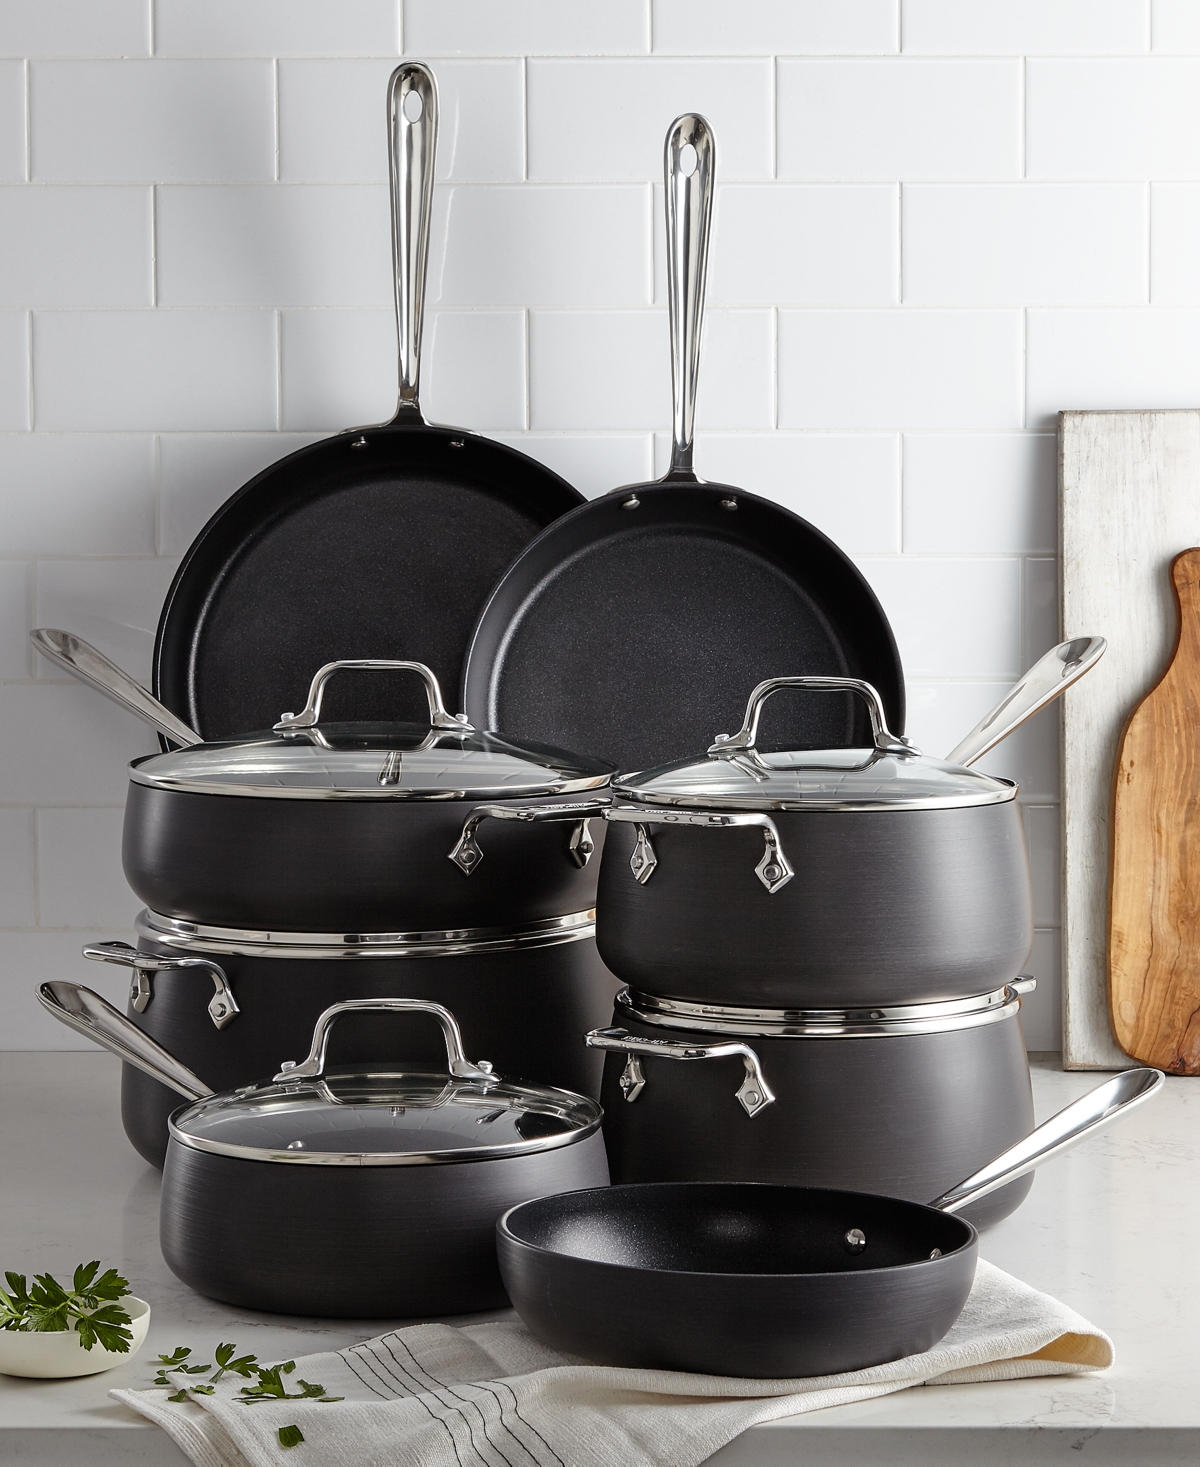 All-Clad Hard-Anodized 13 Piece Cookware Set